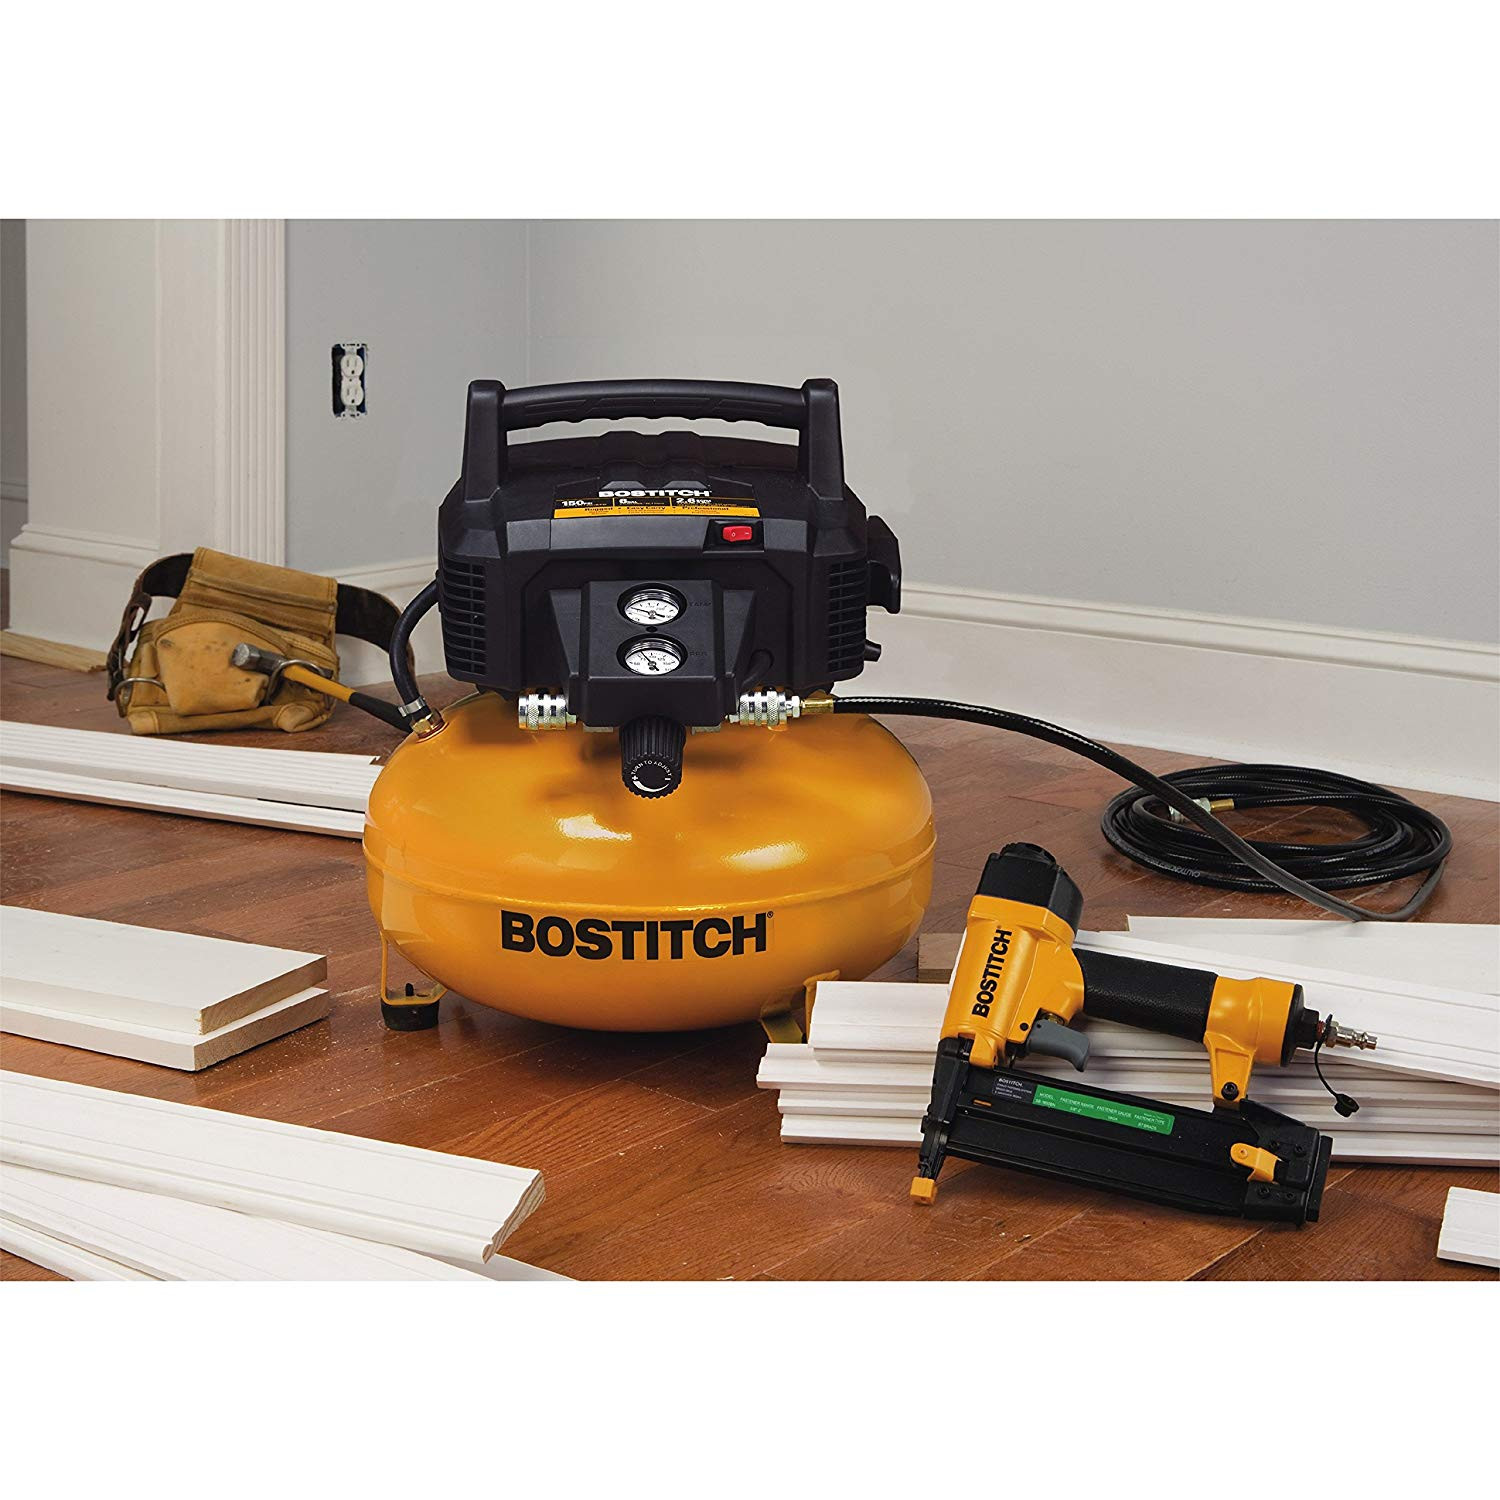 12 Cute Hardwood Floor Nail Gun Harbor Freight 2024 free download hardwood floor nail gun harbor freight of bostitch btfp1kit 1 tool and compressor combo kit amazon com with regard to 91eitd22obl sl1500